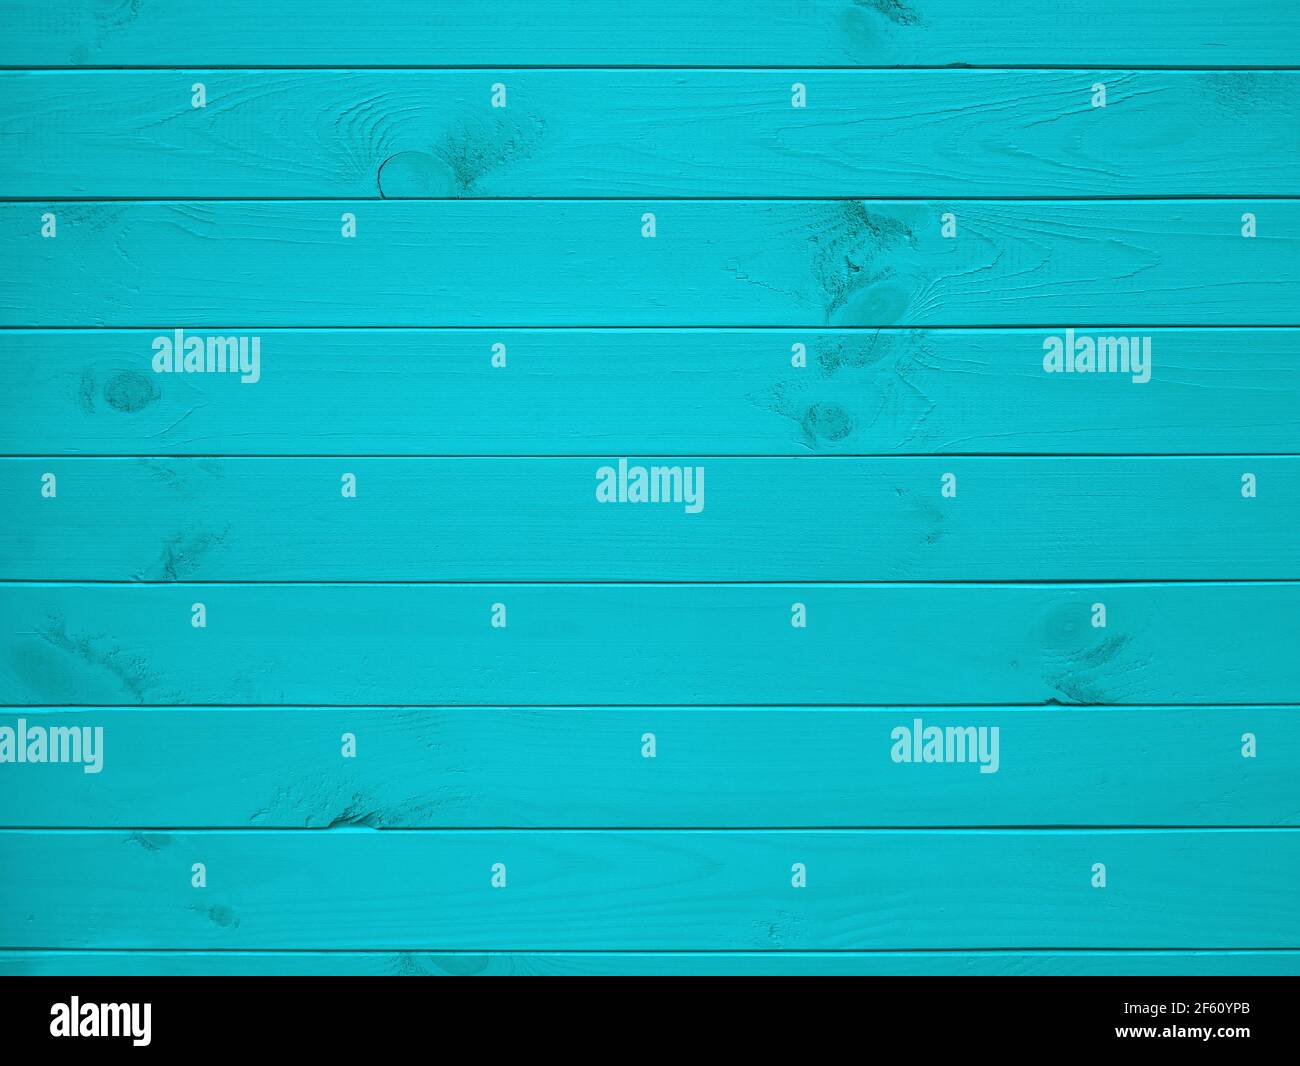 Big new wooden board painted in turquoise color as a background Stock Photo